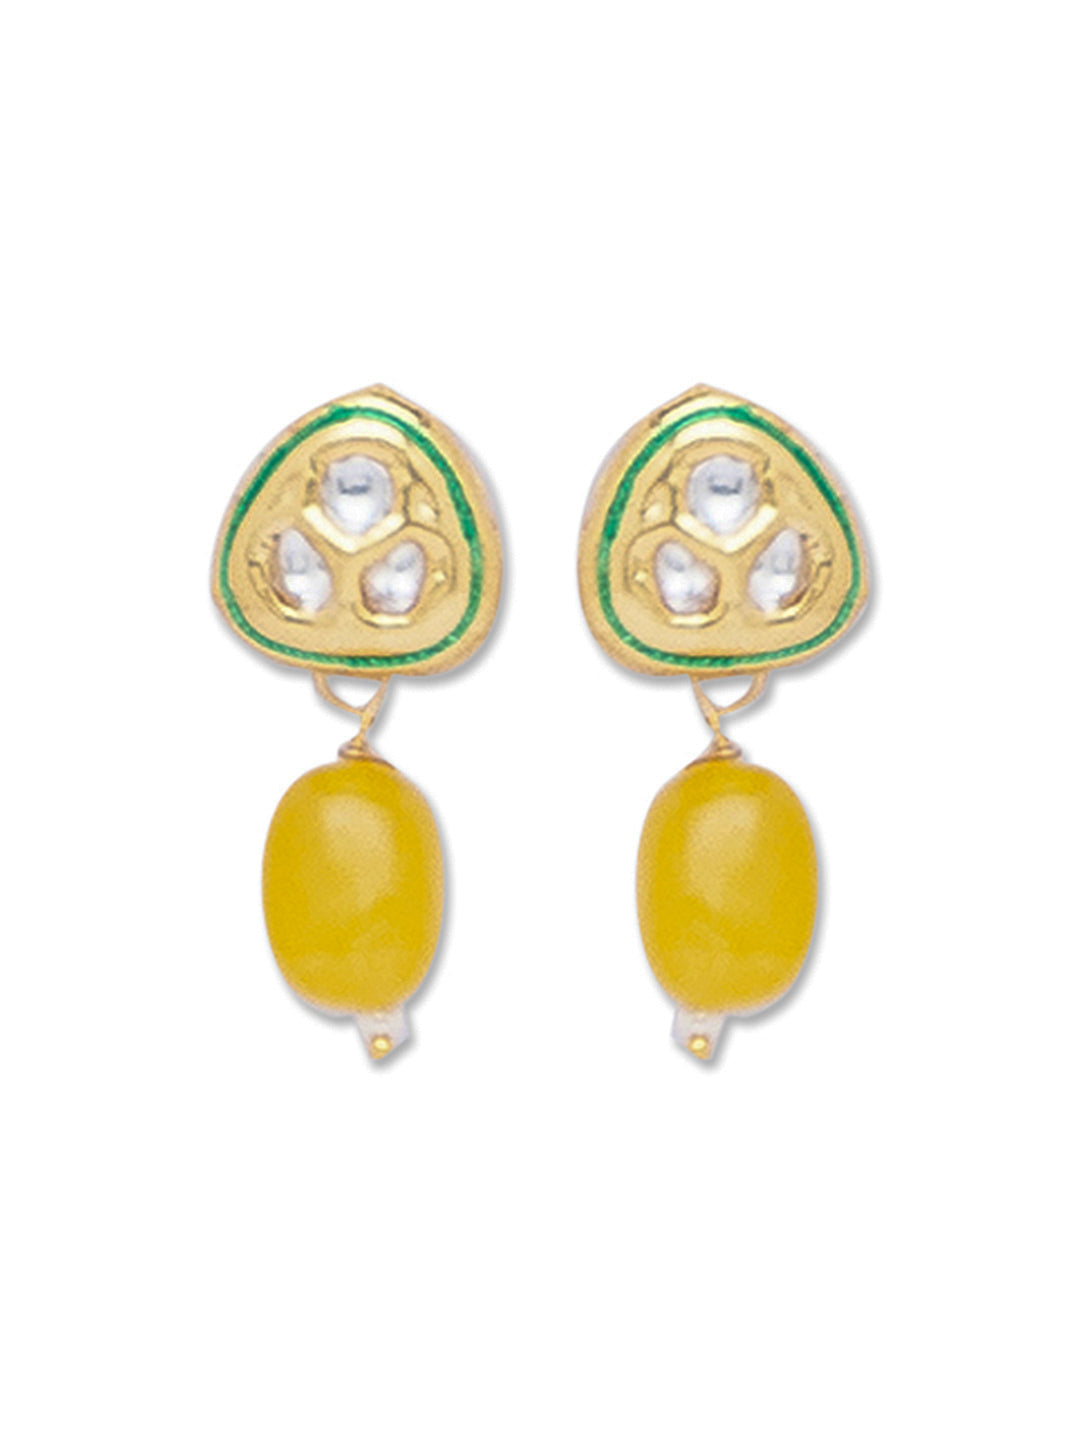 Gold Polished Earring with Yellow colored Onyx Tumbles